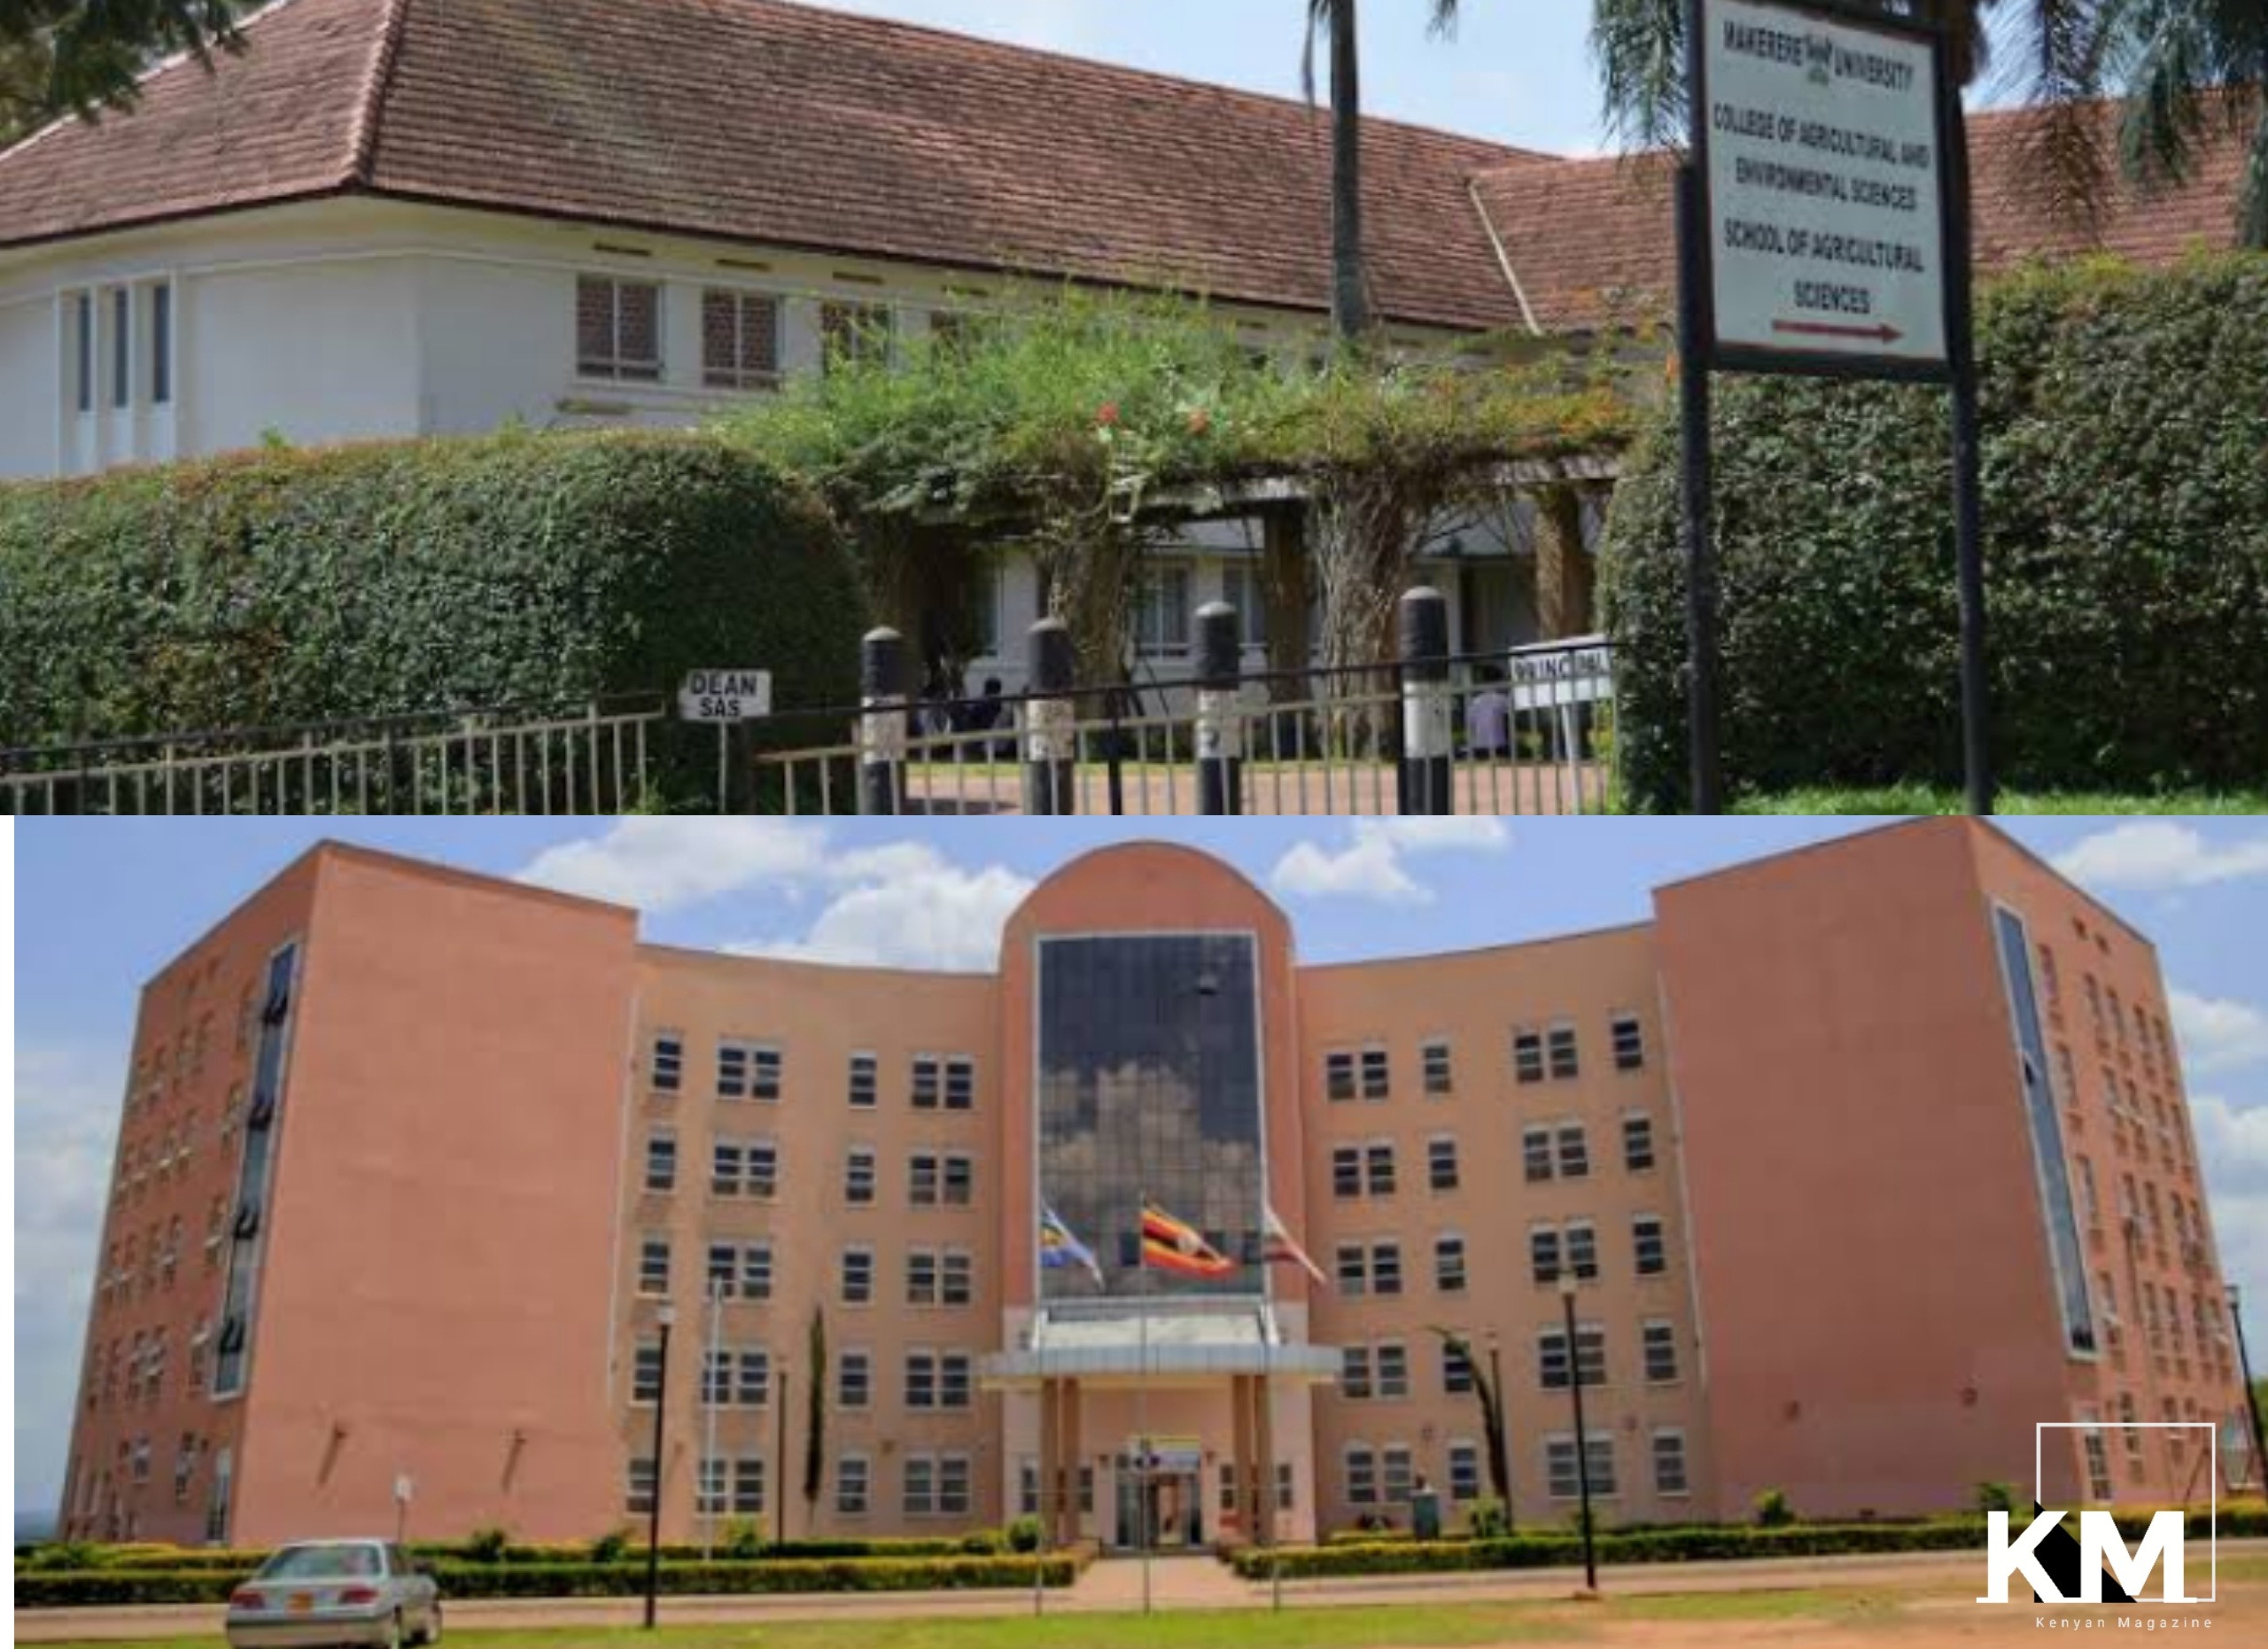 Agricultural college and university in uganda